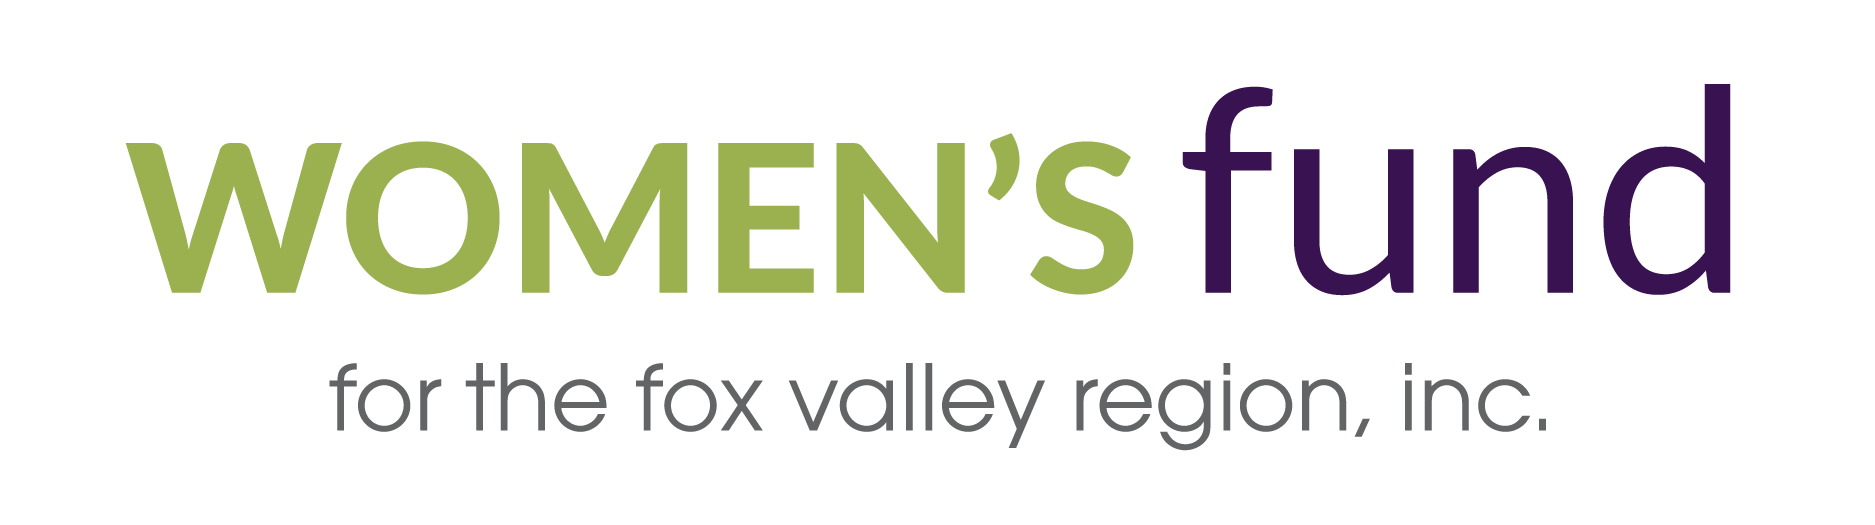 Women's Fund for the Fox Valley logo